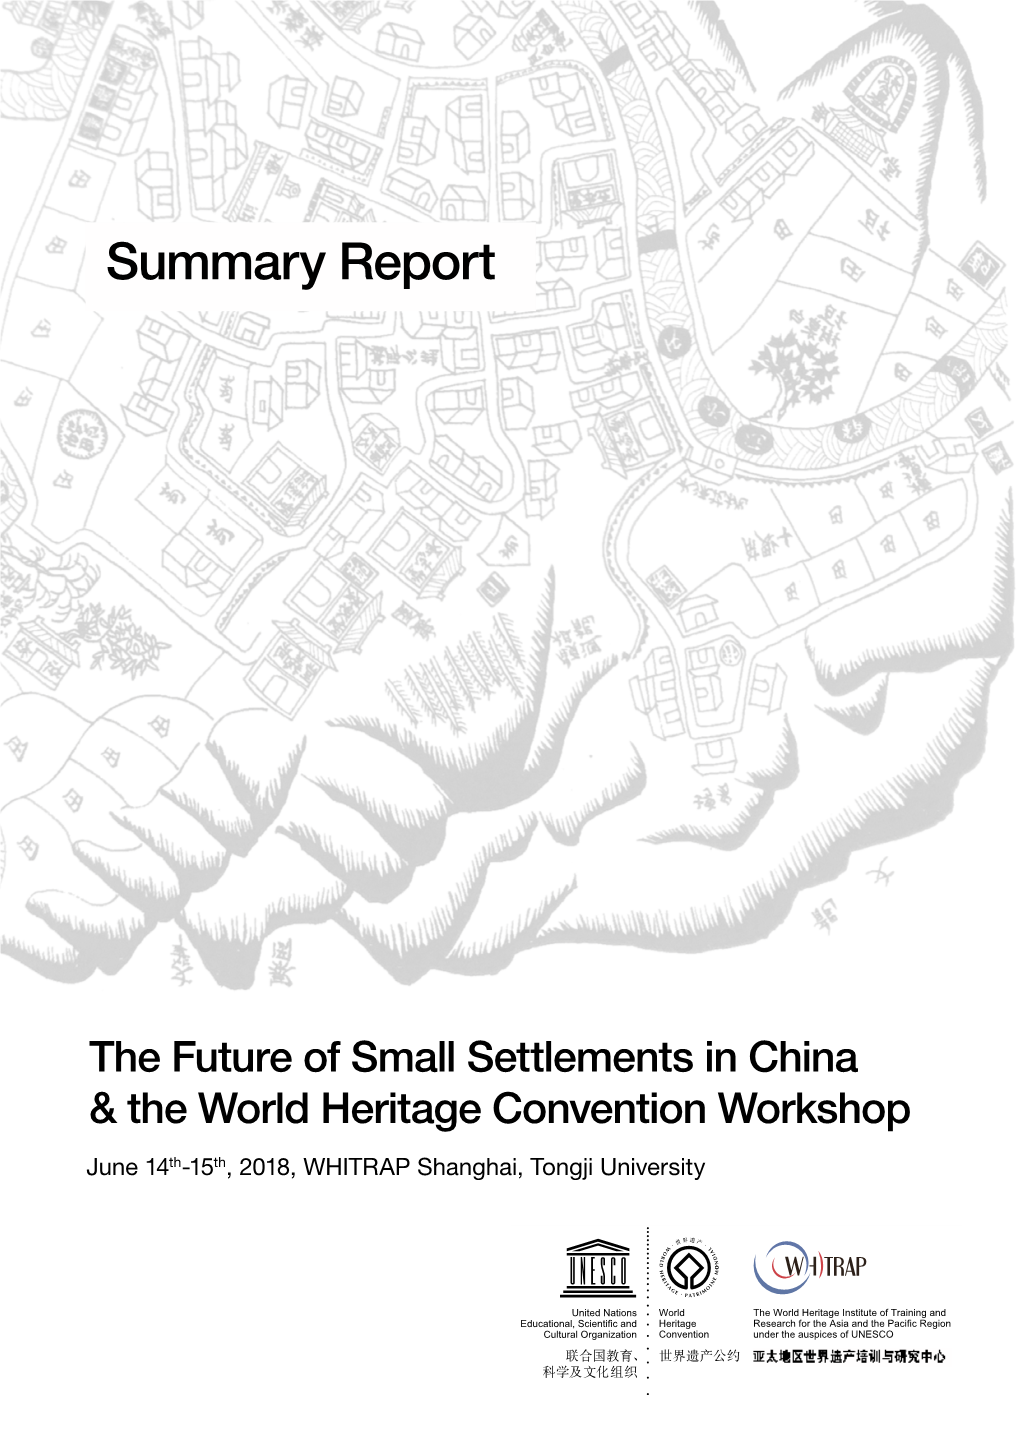 The Future of Small Settlements in China & the World Heritage